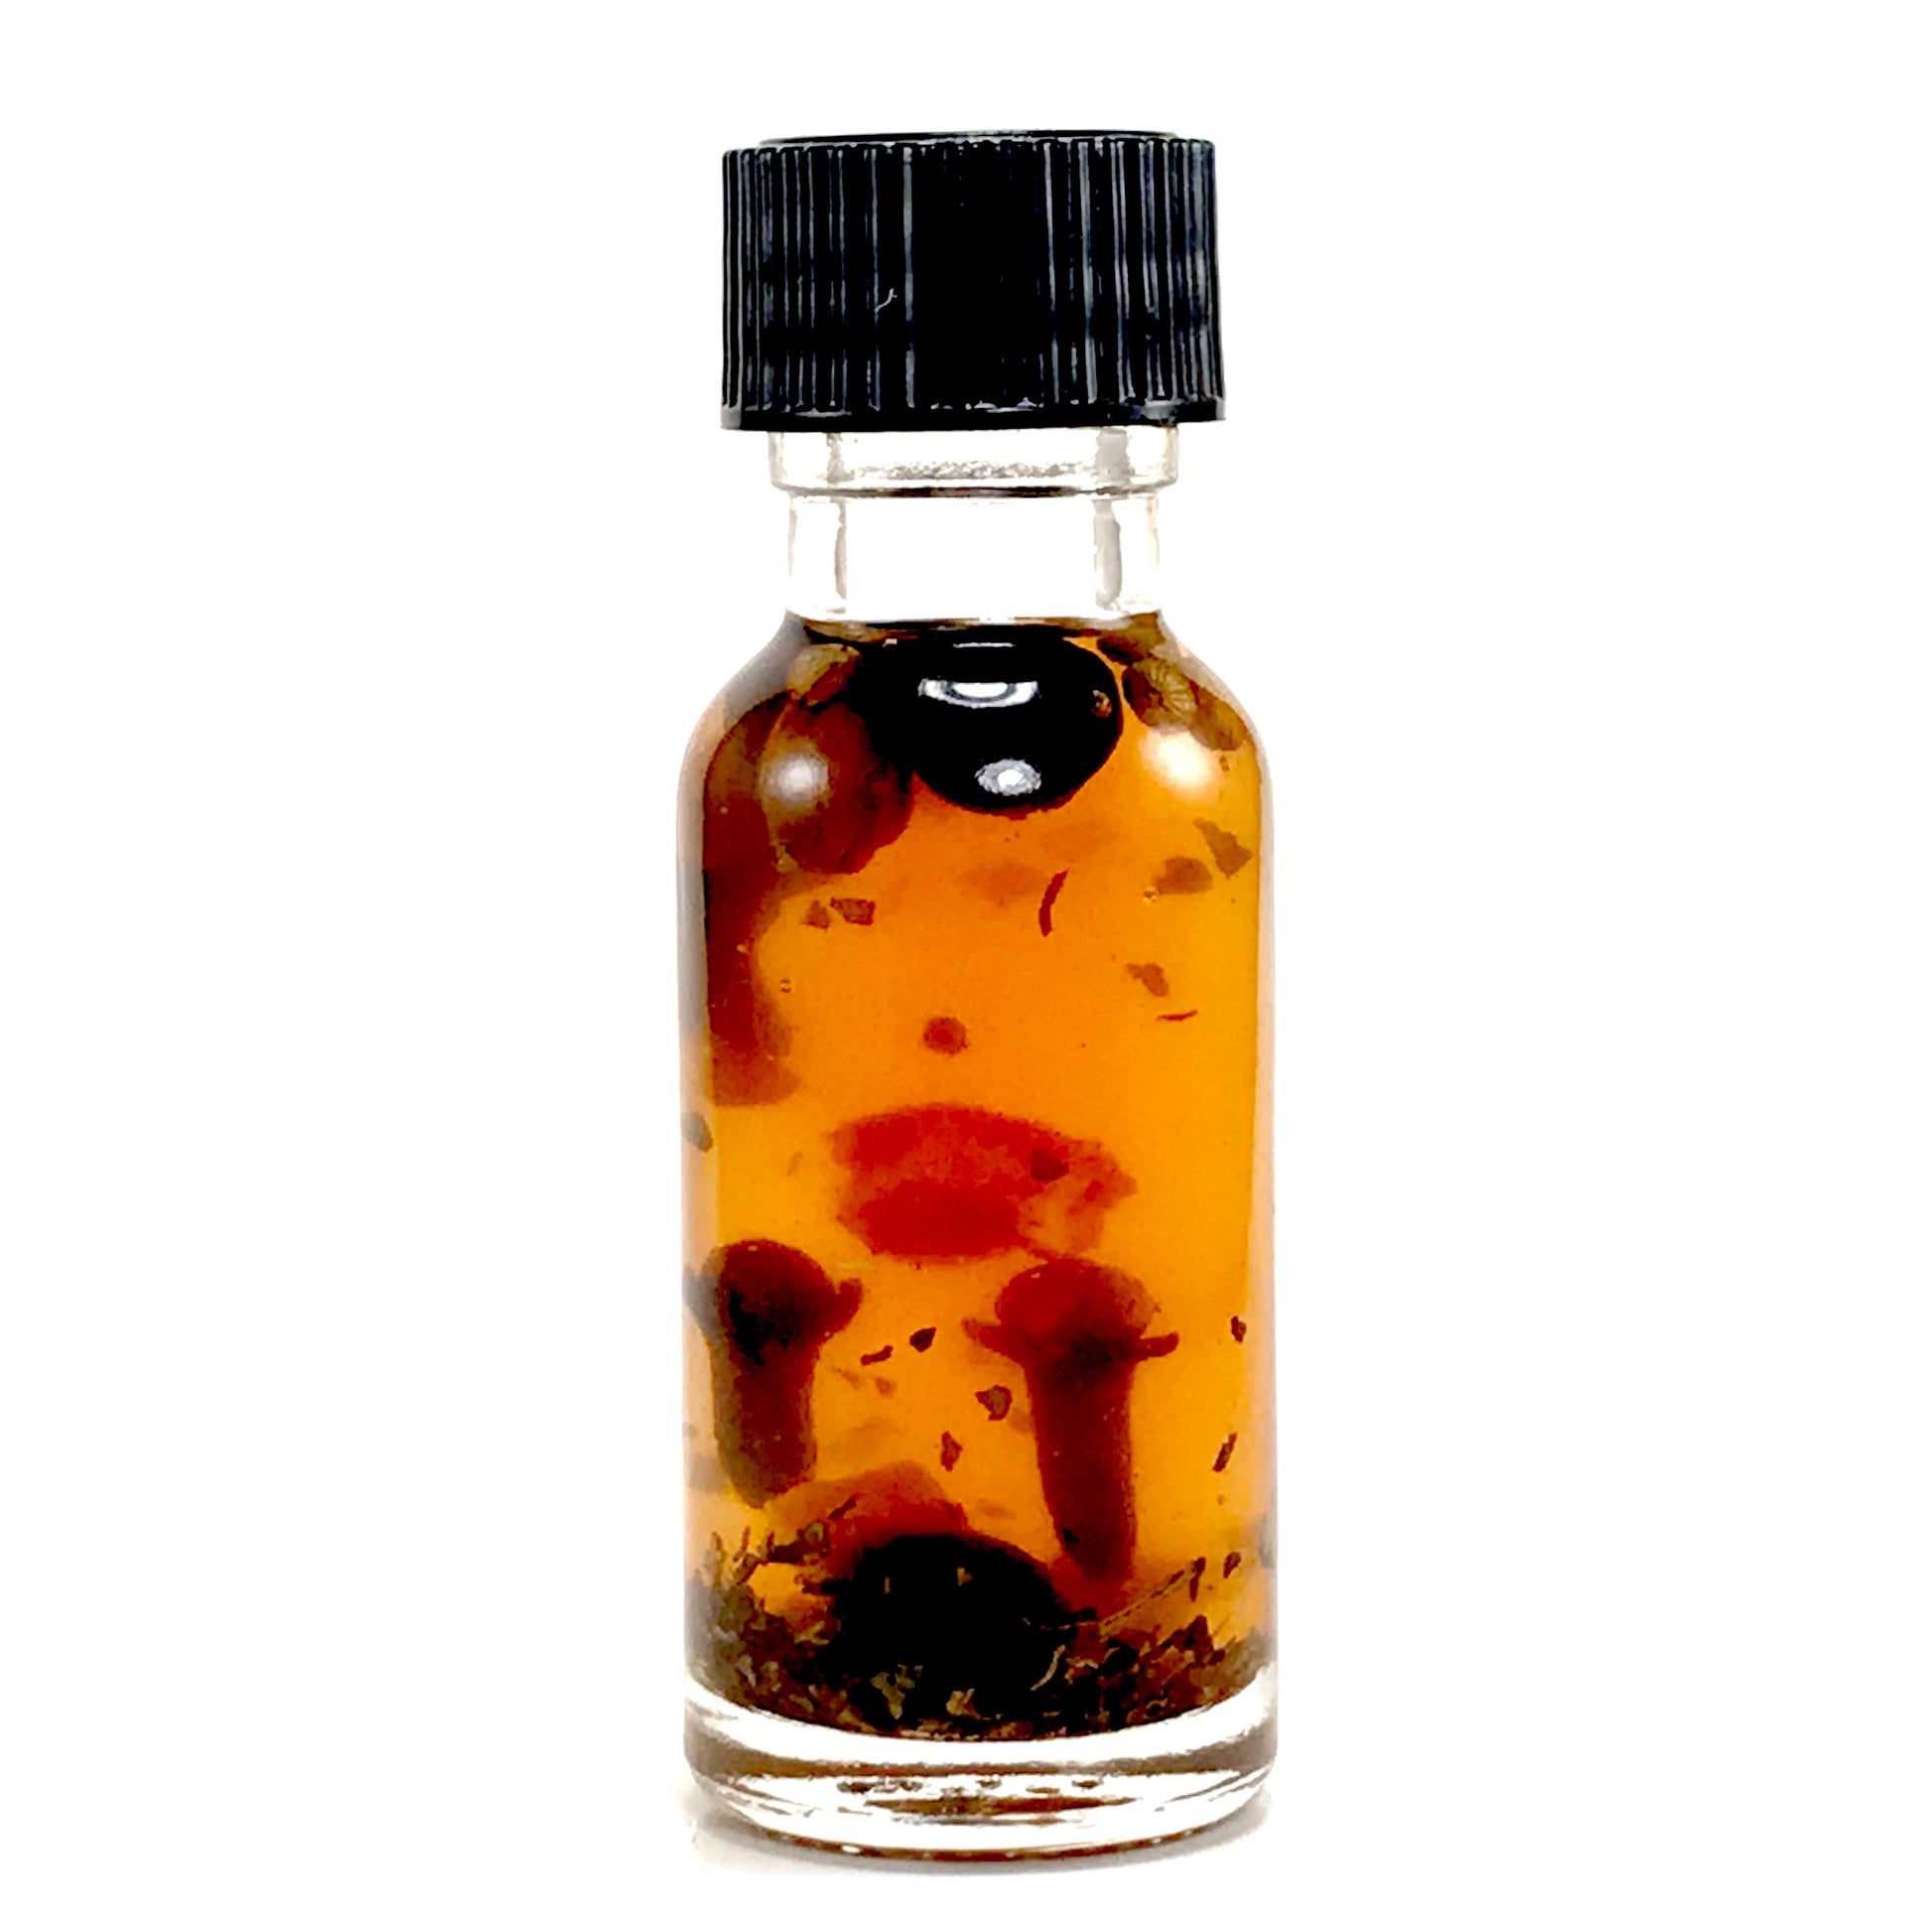 Fire Elemental Oil, Twichery, Blended, alignment with nature, Rosemary, Clove, Aromatherapy Blend, Elements Earth, Air, Fire, Water